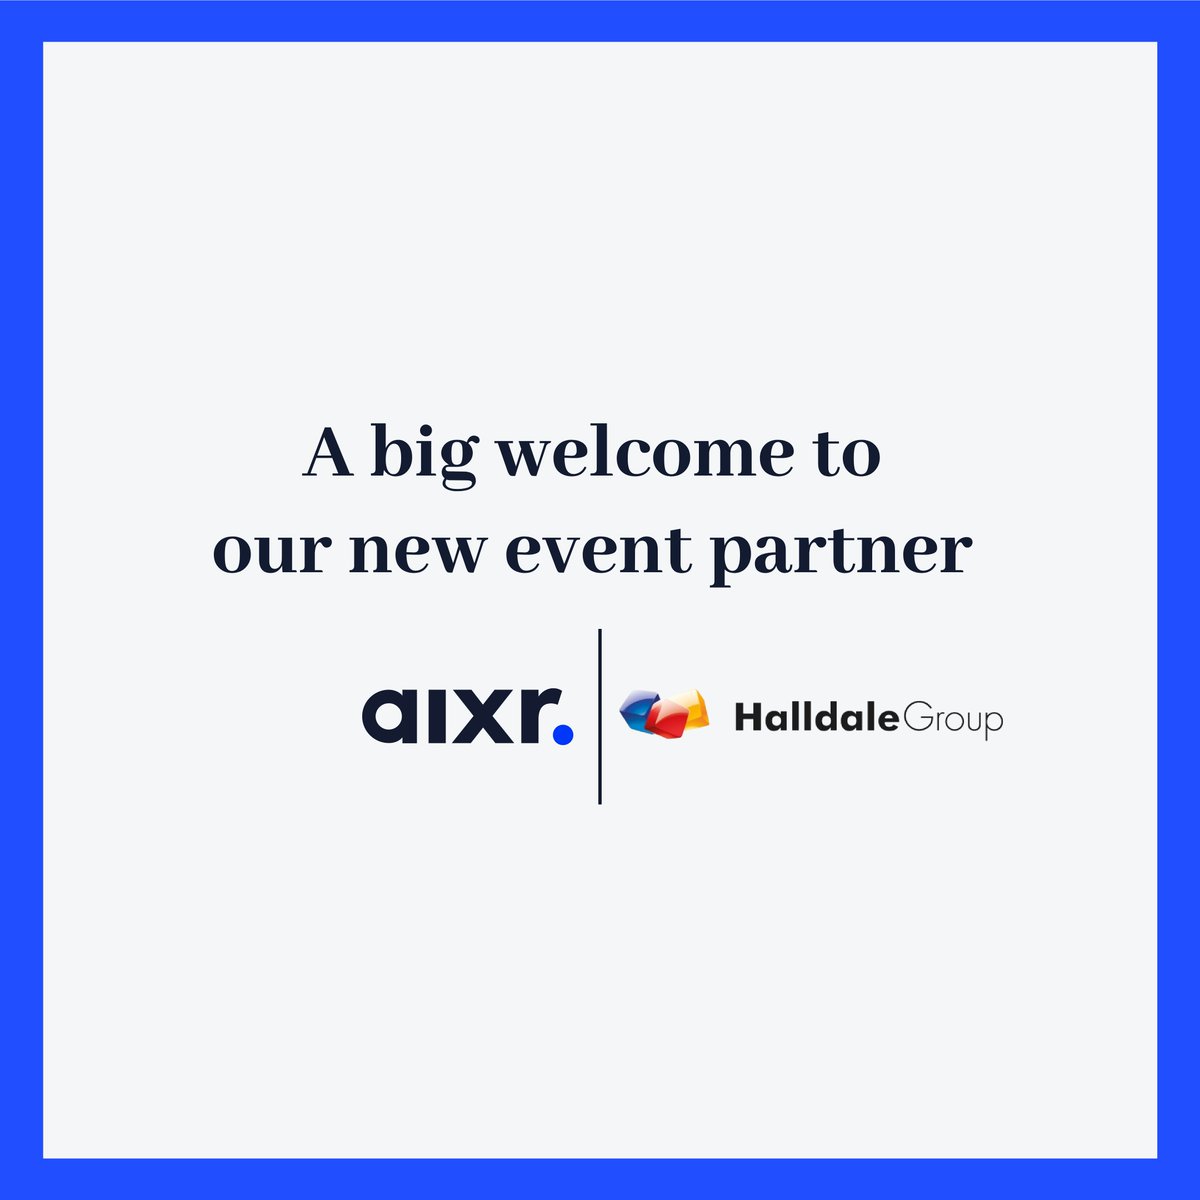 We're proud to announce @HalldaleGroup as our latest event partner 👏 Together, we're taking strides in advancing innovation and technology within our community. Get more information about this collaboration on our website ➡️ aixr.org/press/articles…